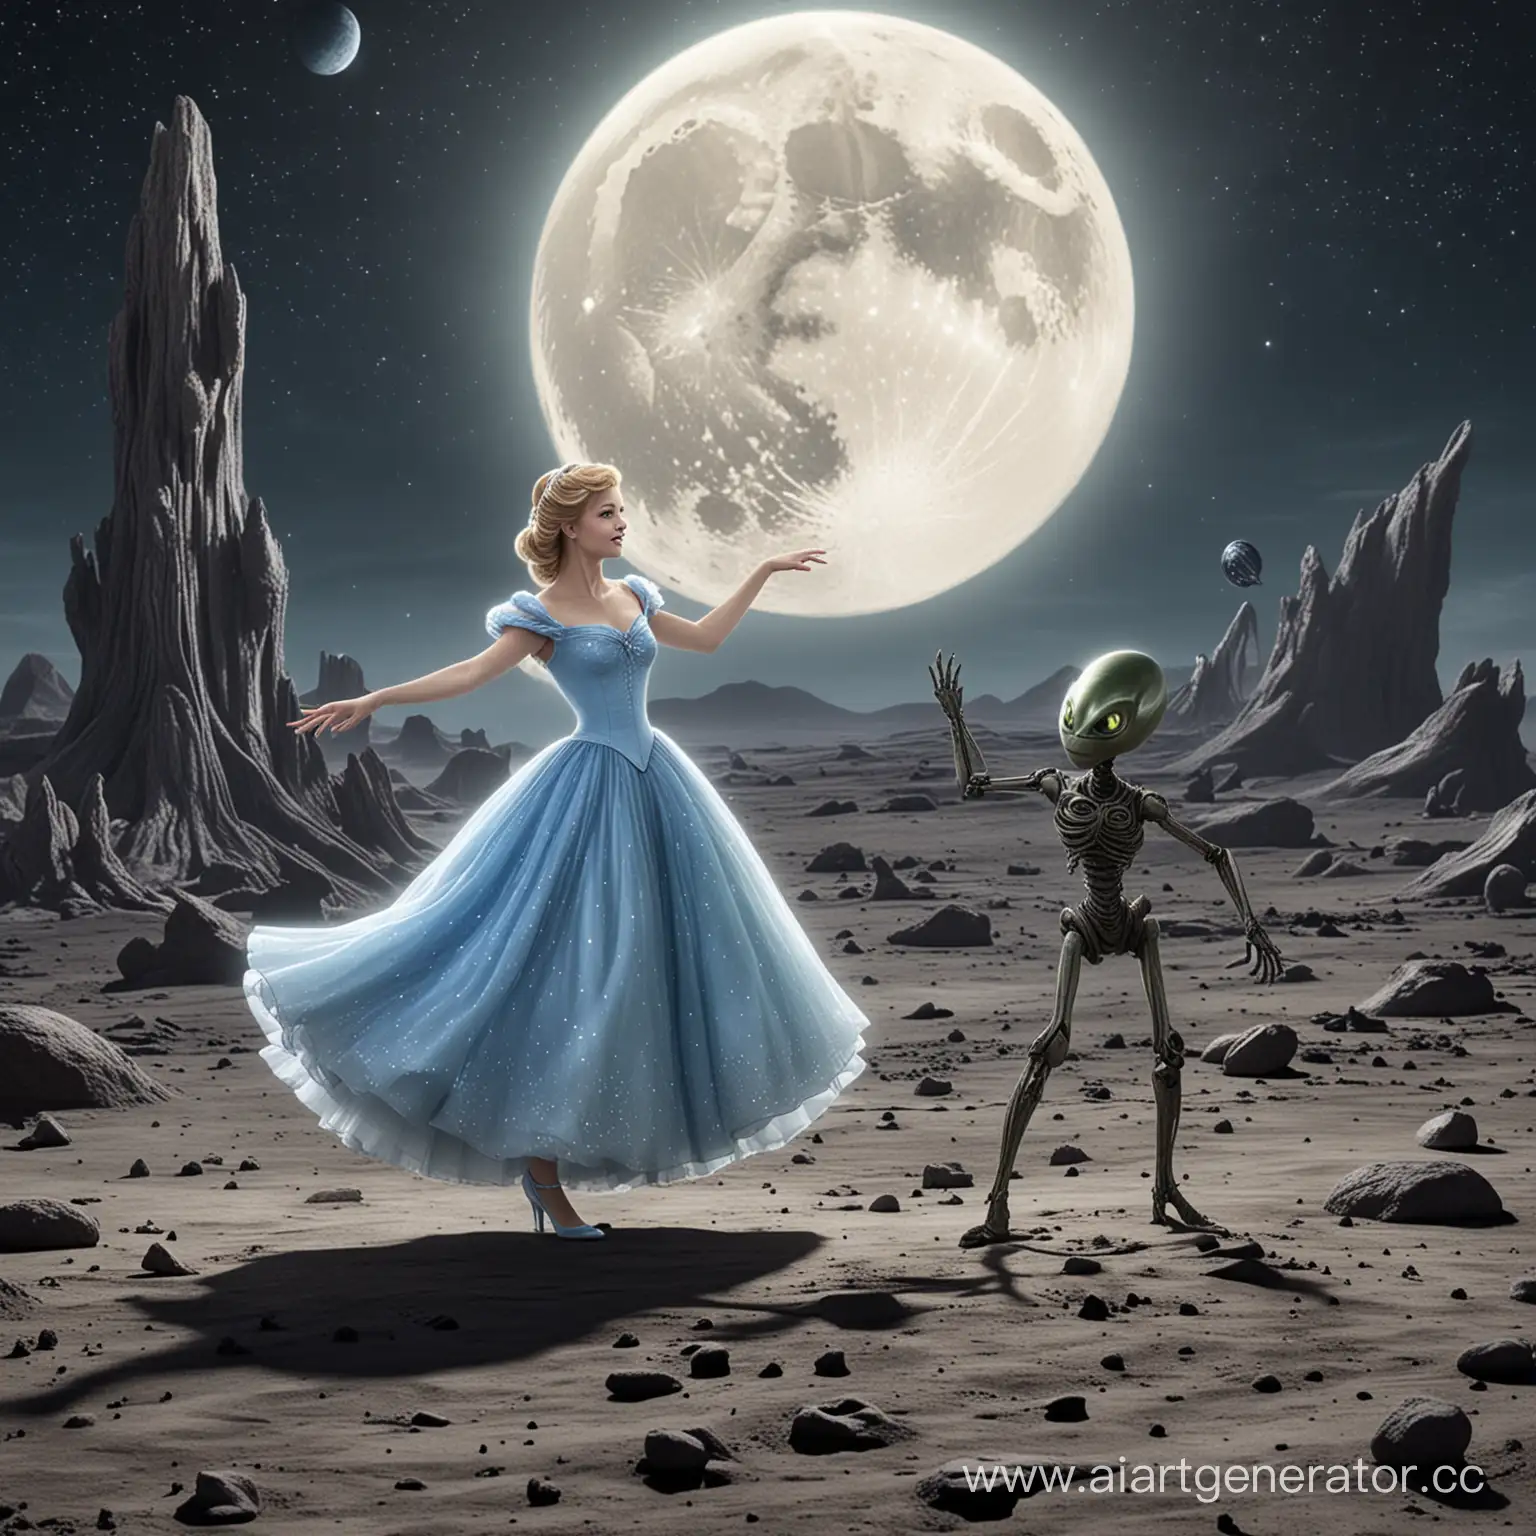 Extraterrestrial-Ballroom-Dance-on-the-Lunar-Surface